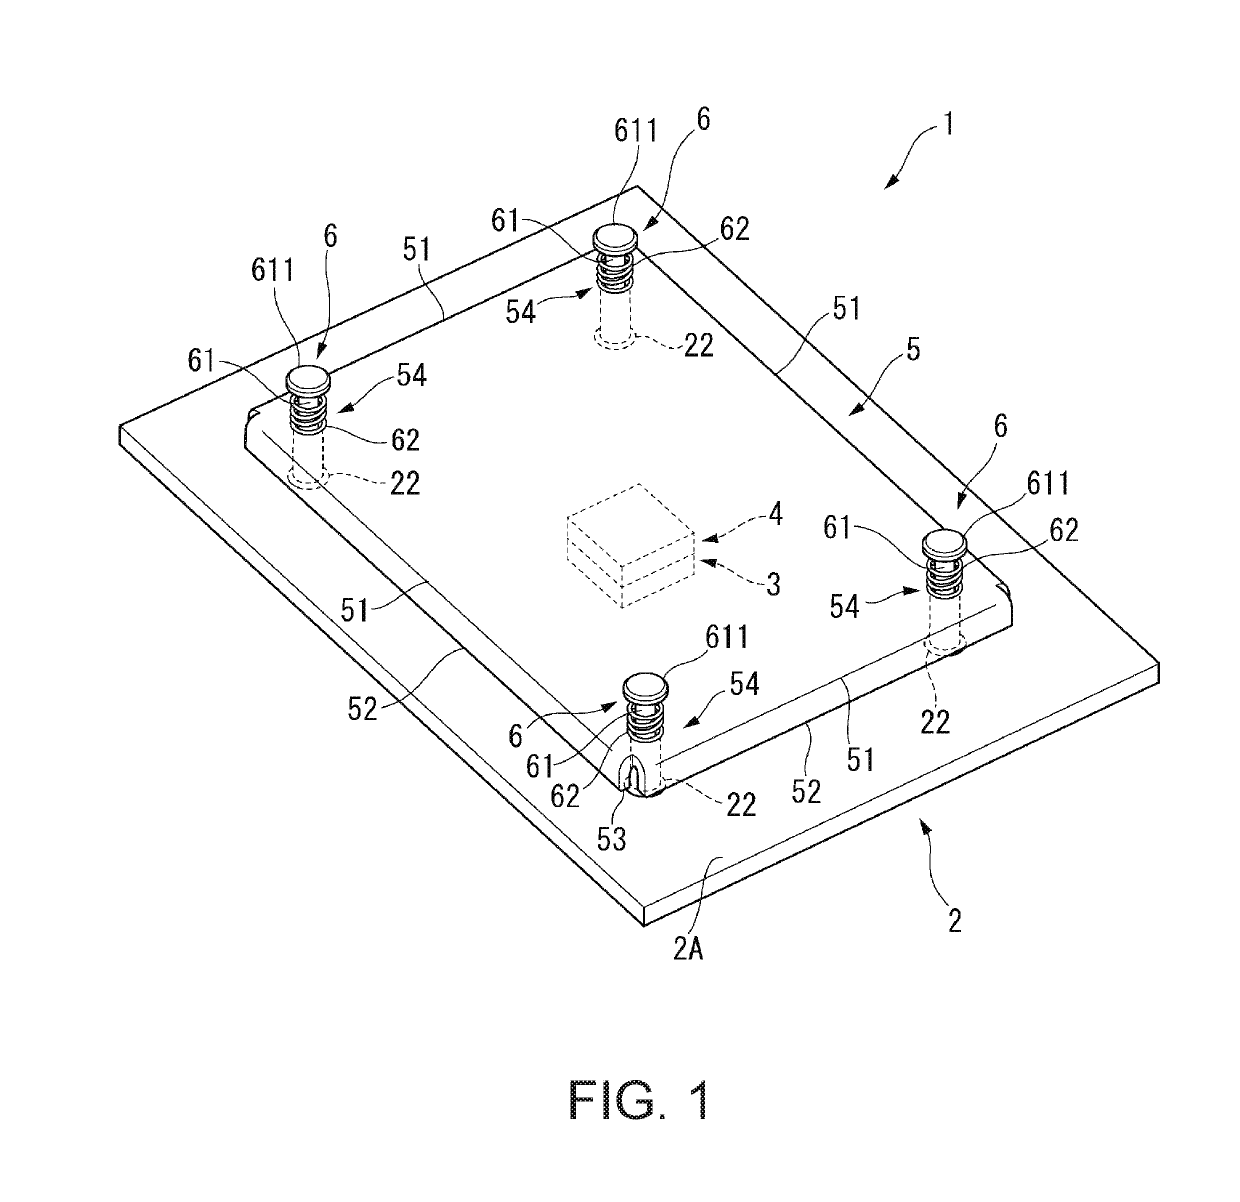 Printed circuit board and electronic device